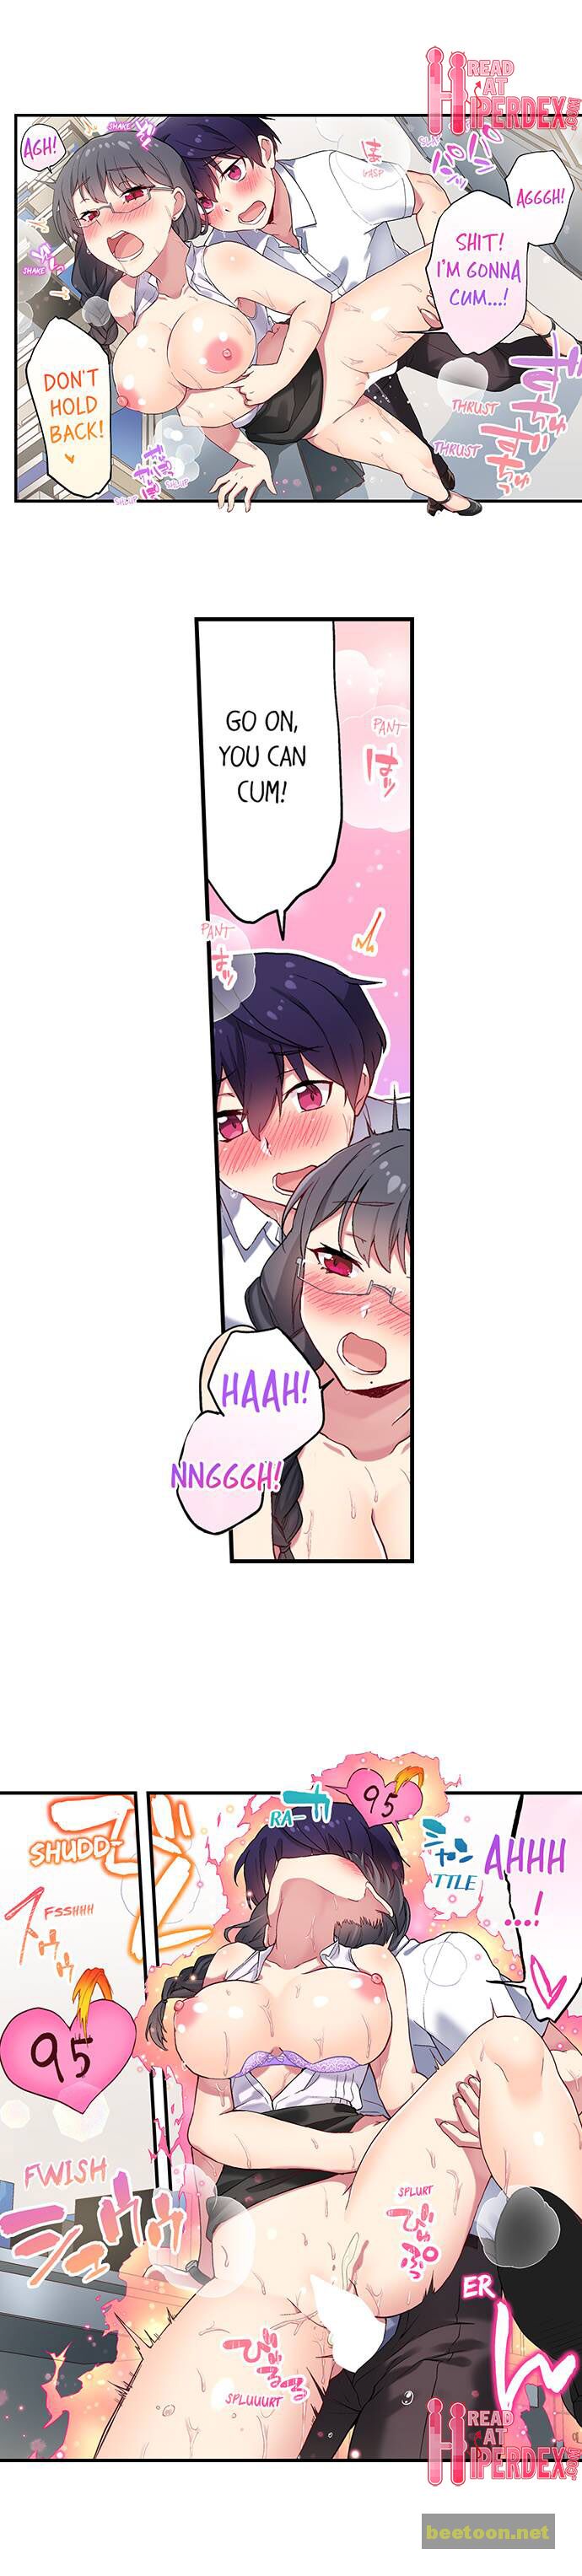 I Can See The Number Of Times People Orgasm Chapter 111 - MyToon.net